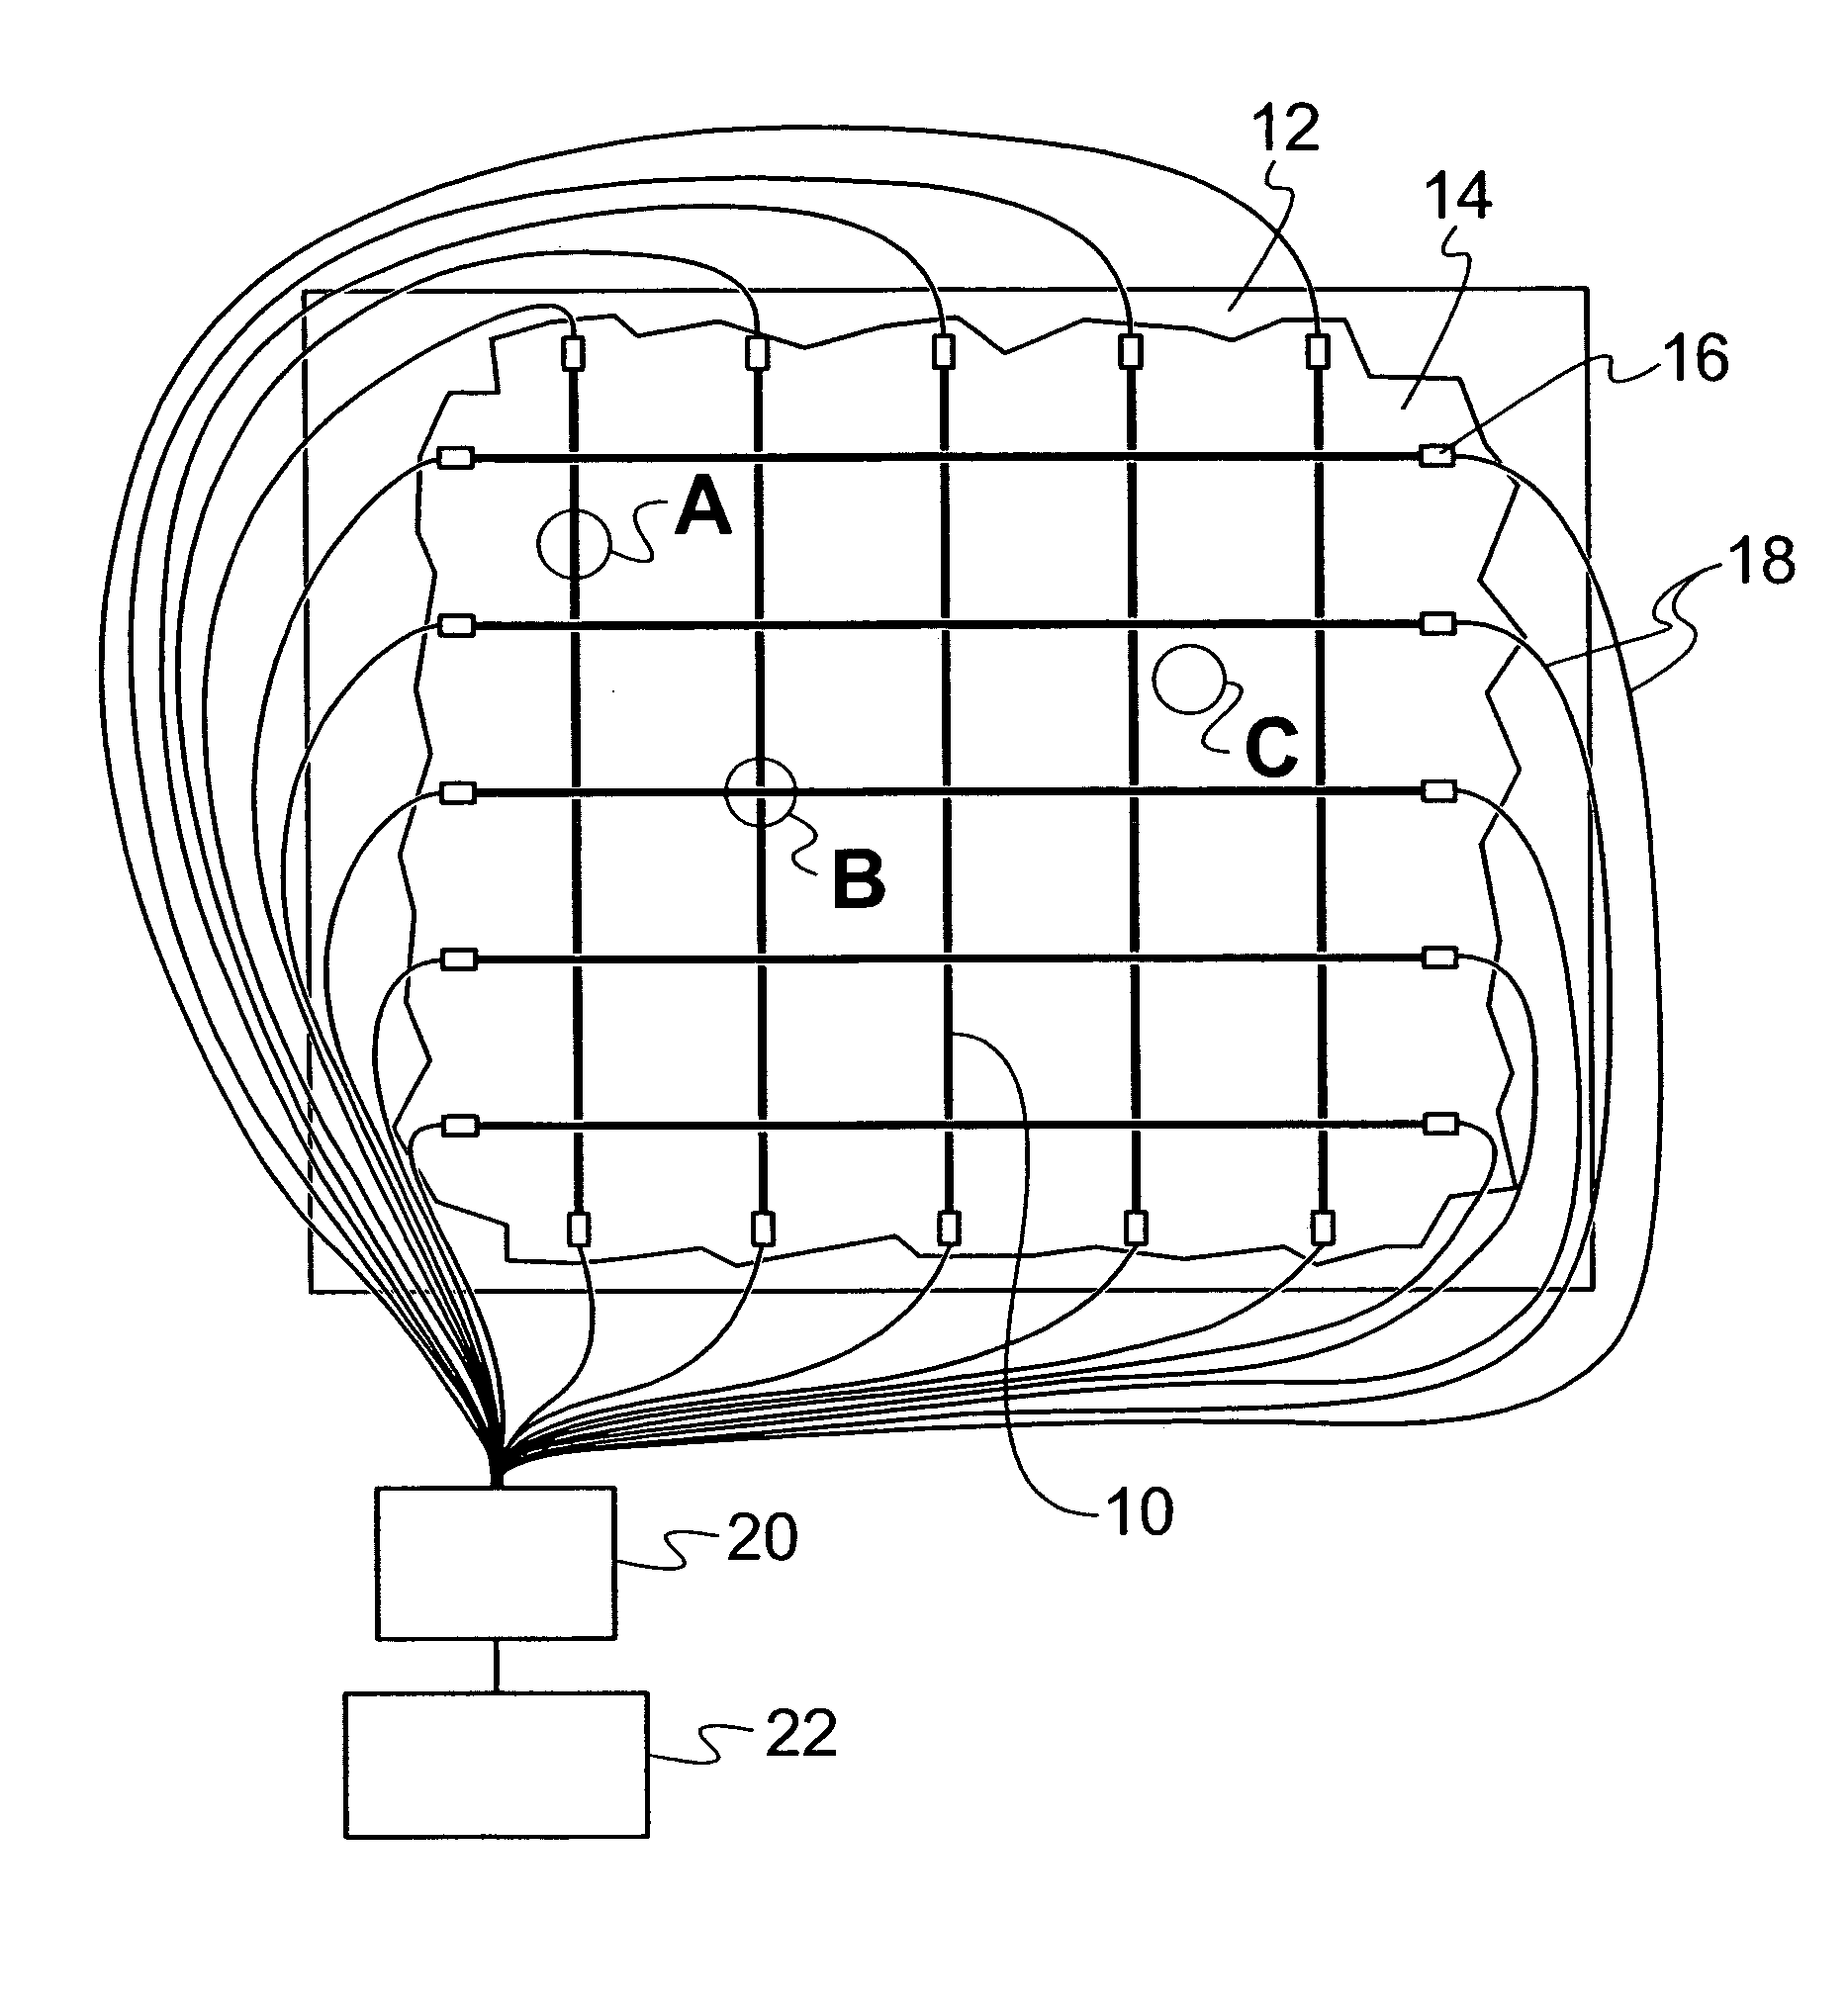 Sensing system for monitoring the structural health of composite structures